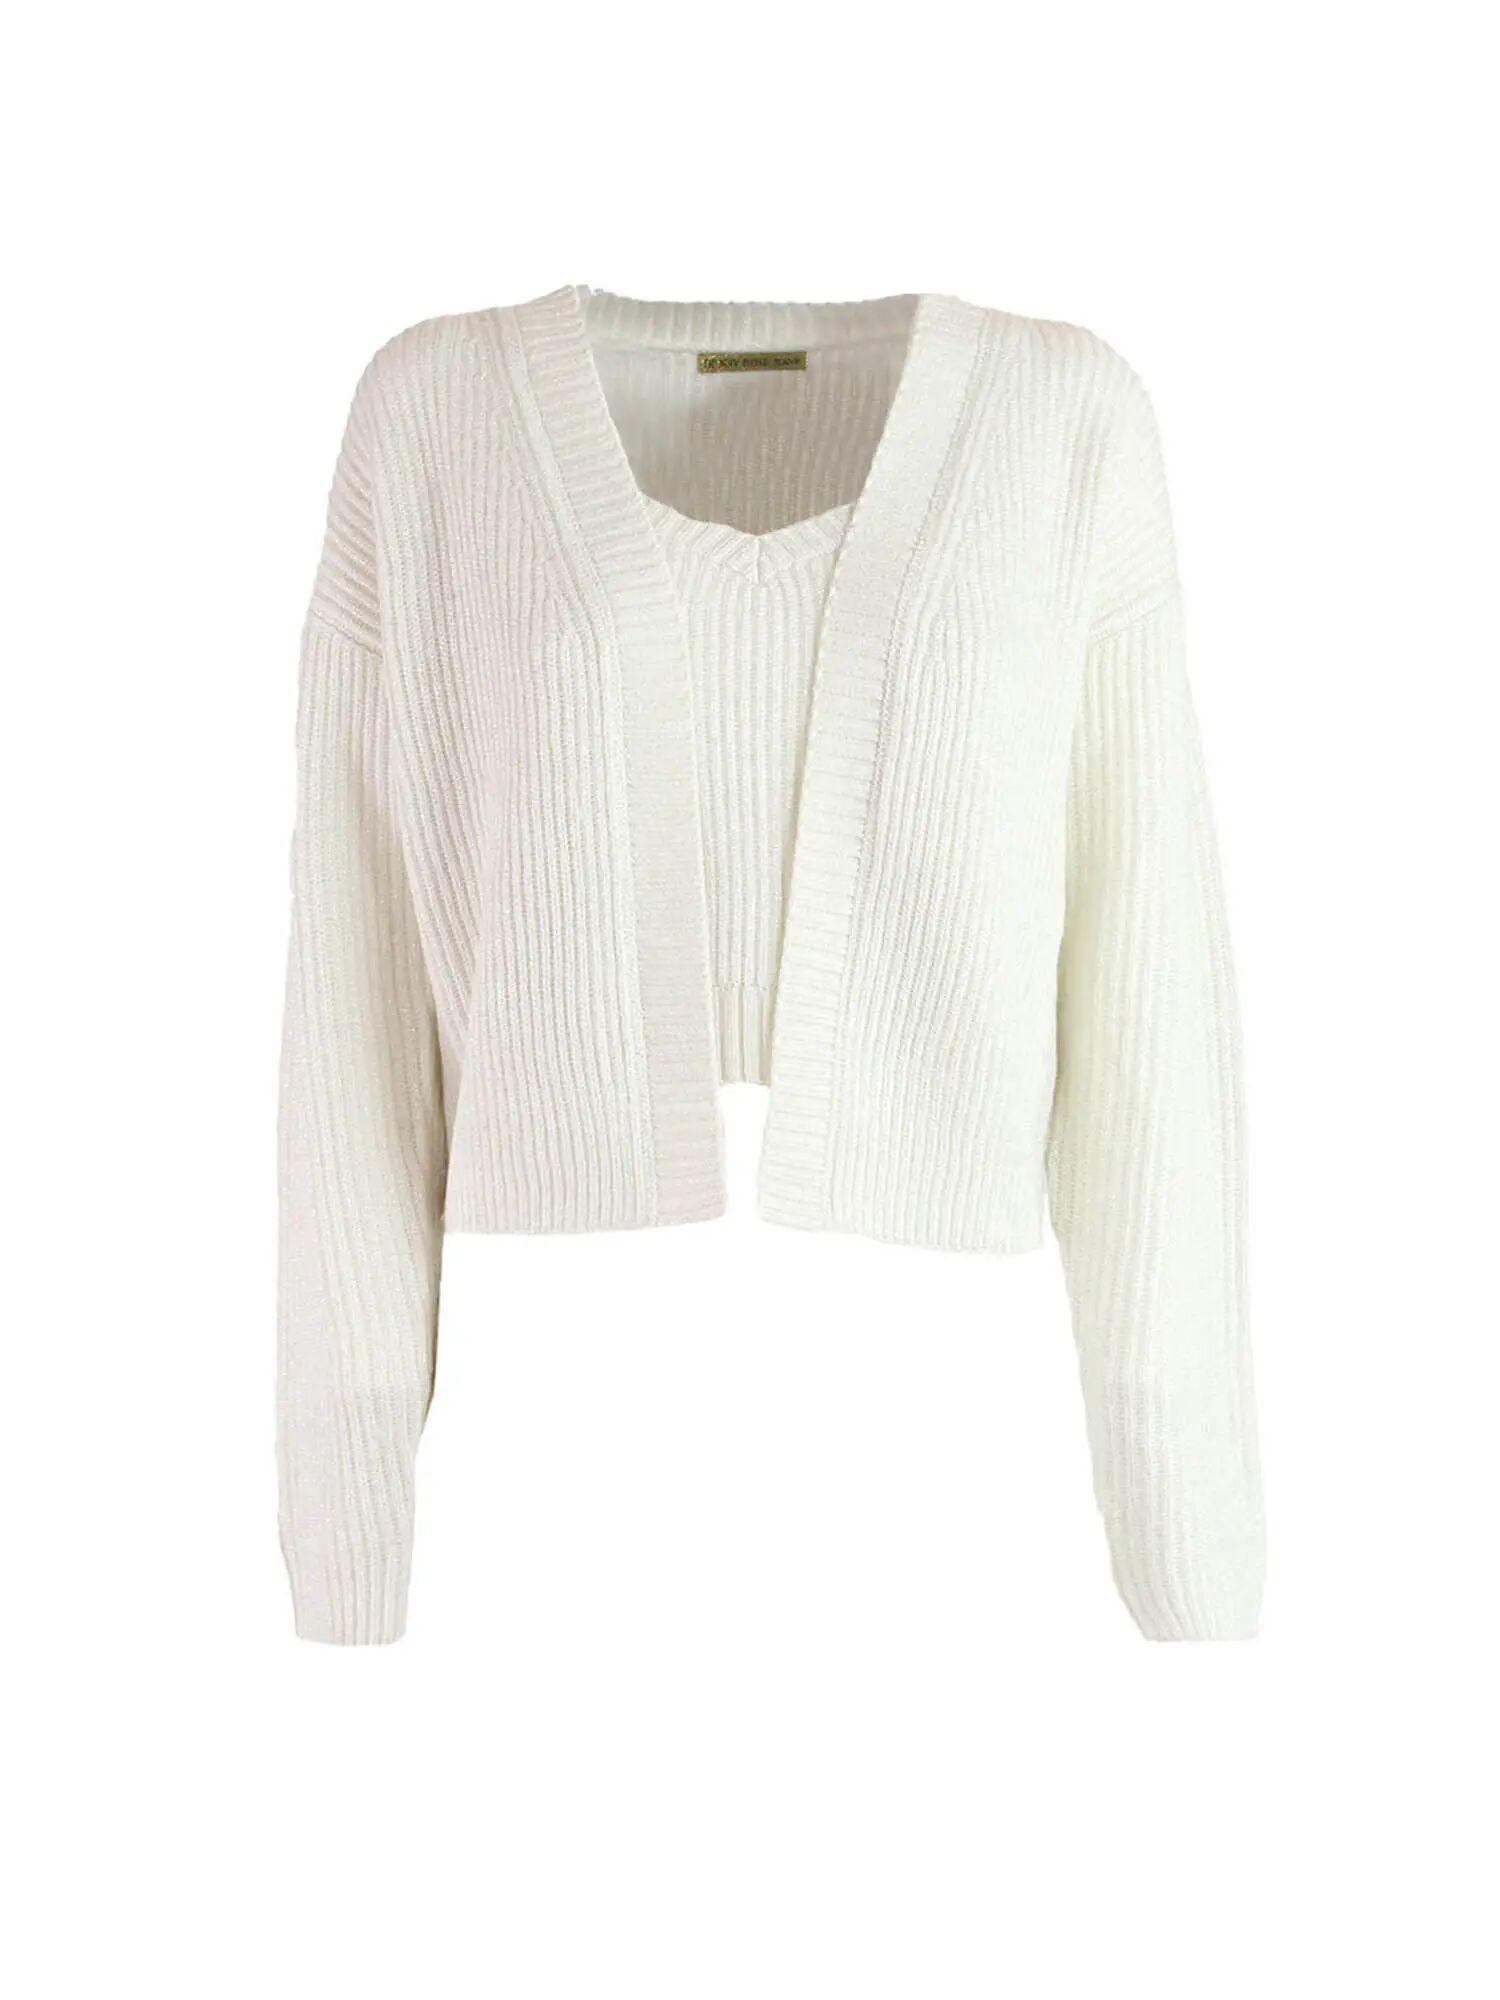 Denny Rose Jeans Cardigan Donna Colore Bianco BIANCO S